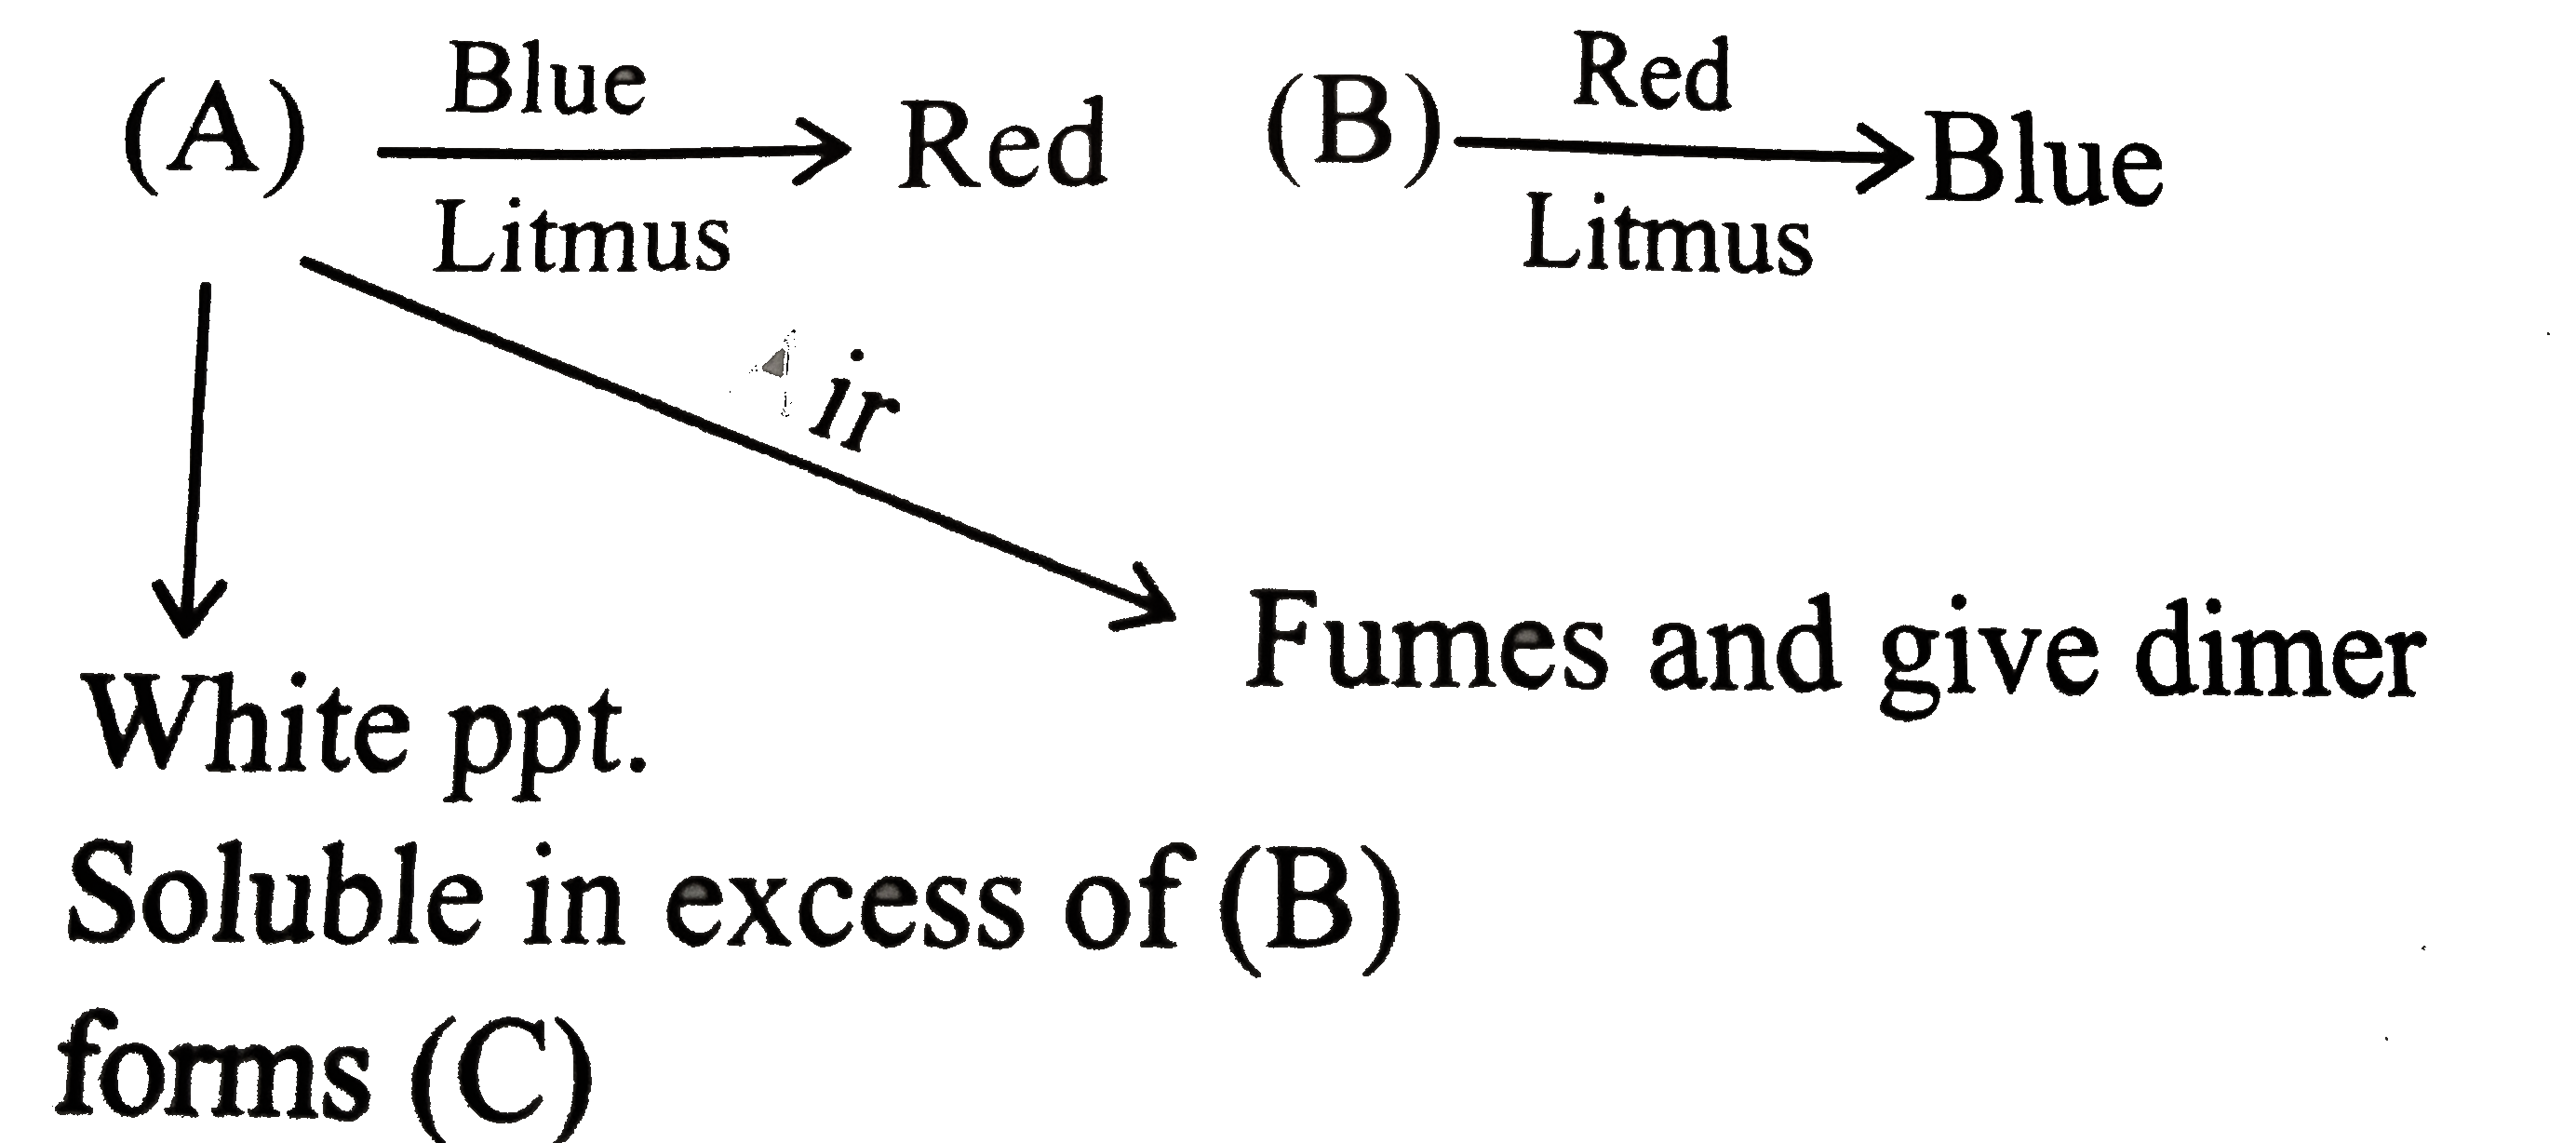 A colourless mixture of two salts (A) and (B) [excess] is soluble in H(2)O.  Identify C